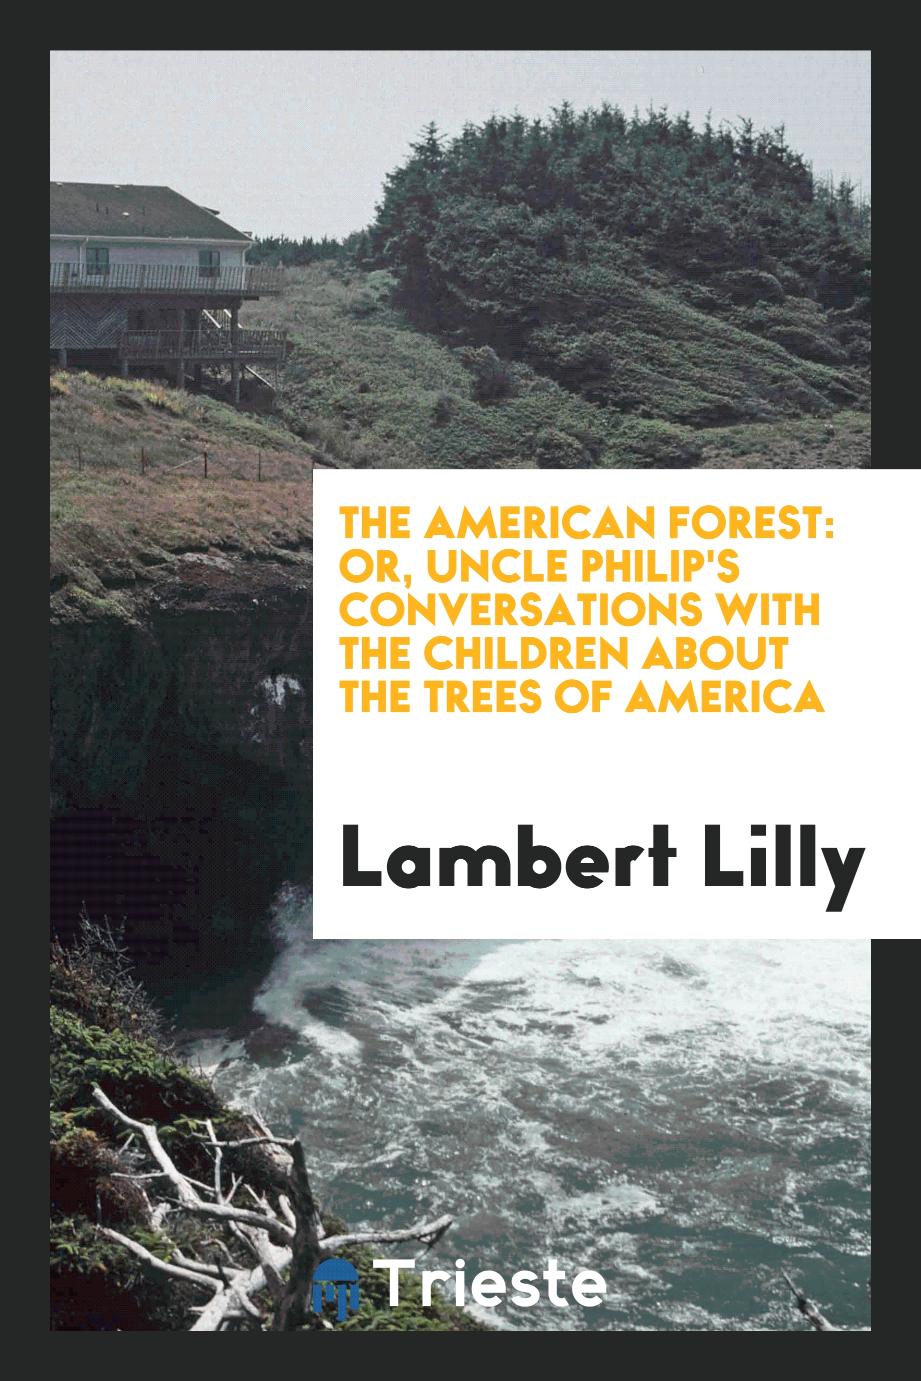 The American forest: or, Uncle Philip's conversations with the children about the trees of America